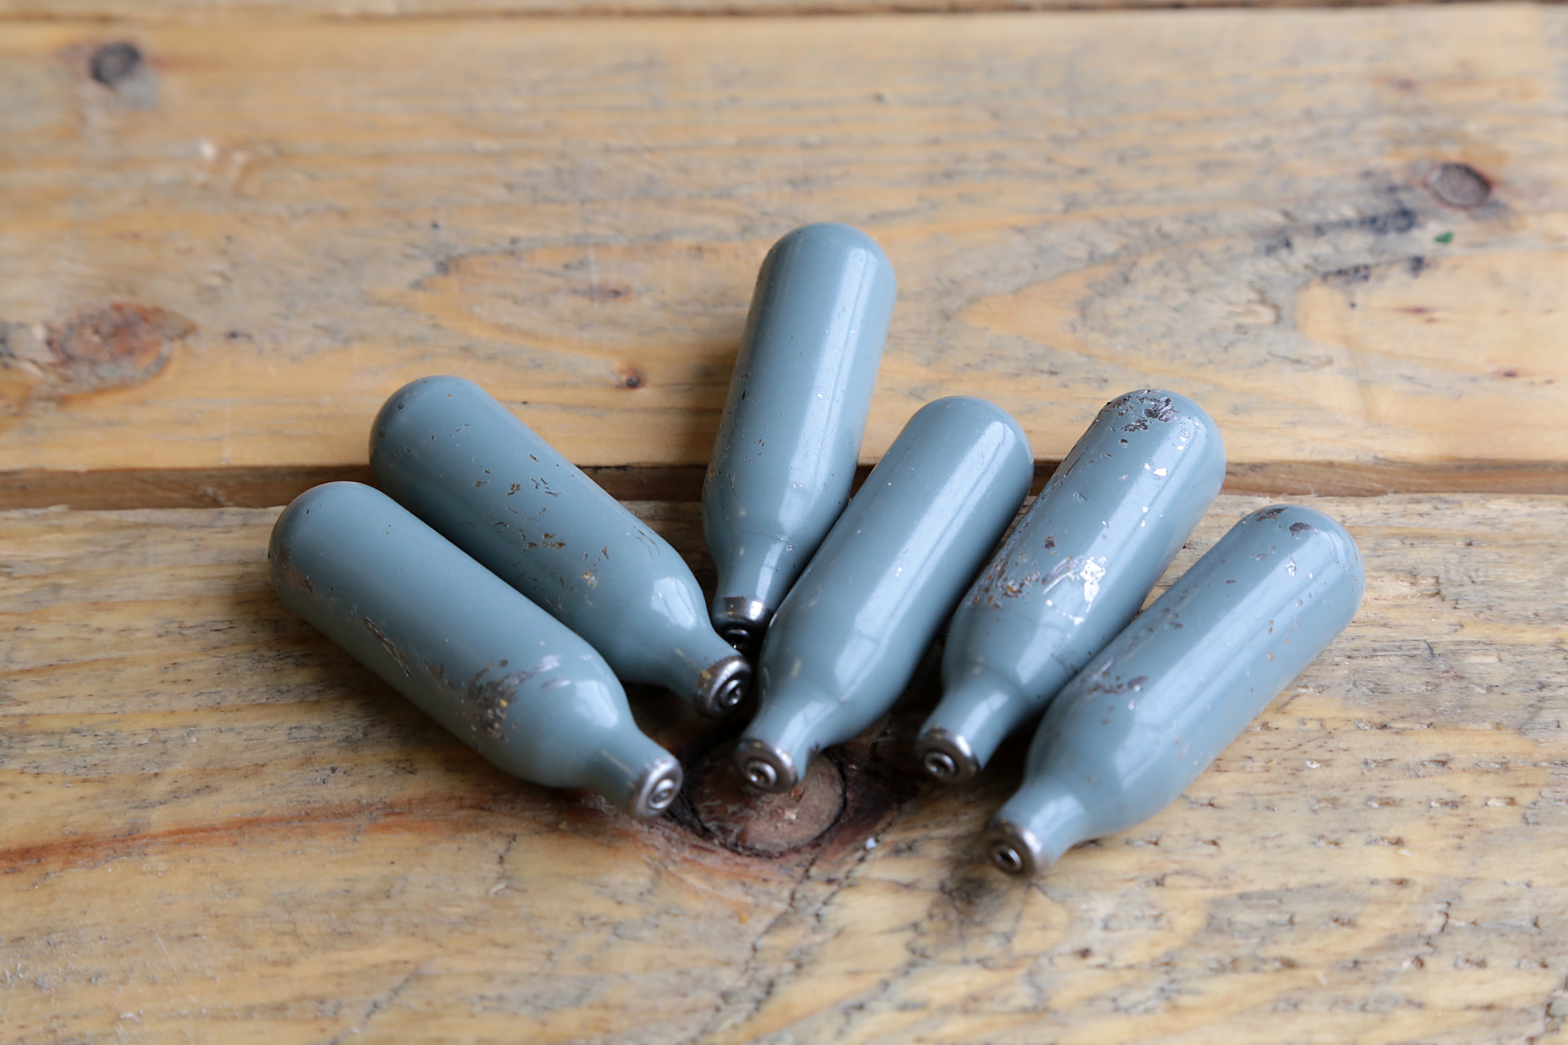 image of laughing gas canisters